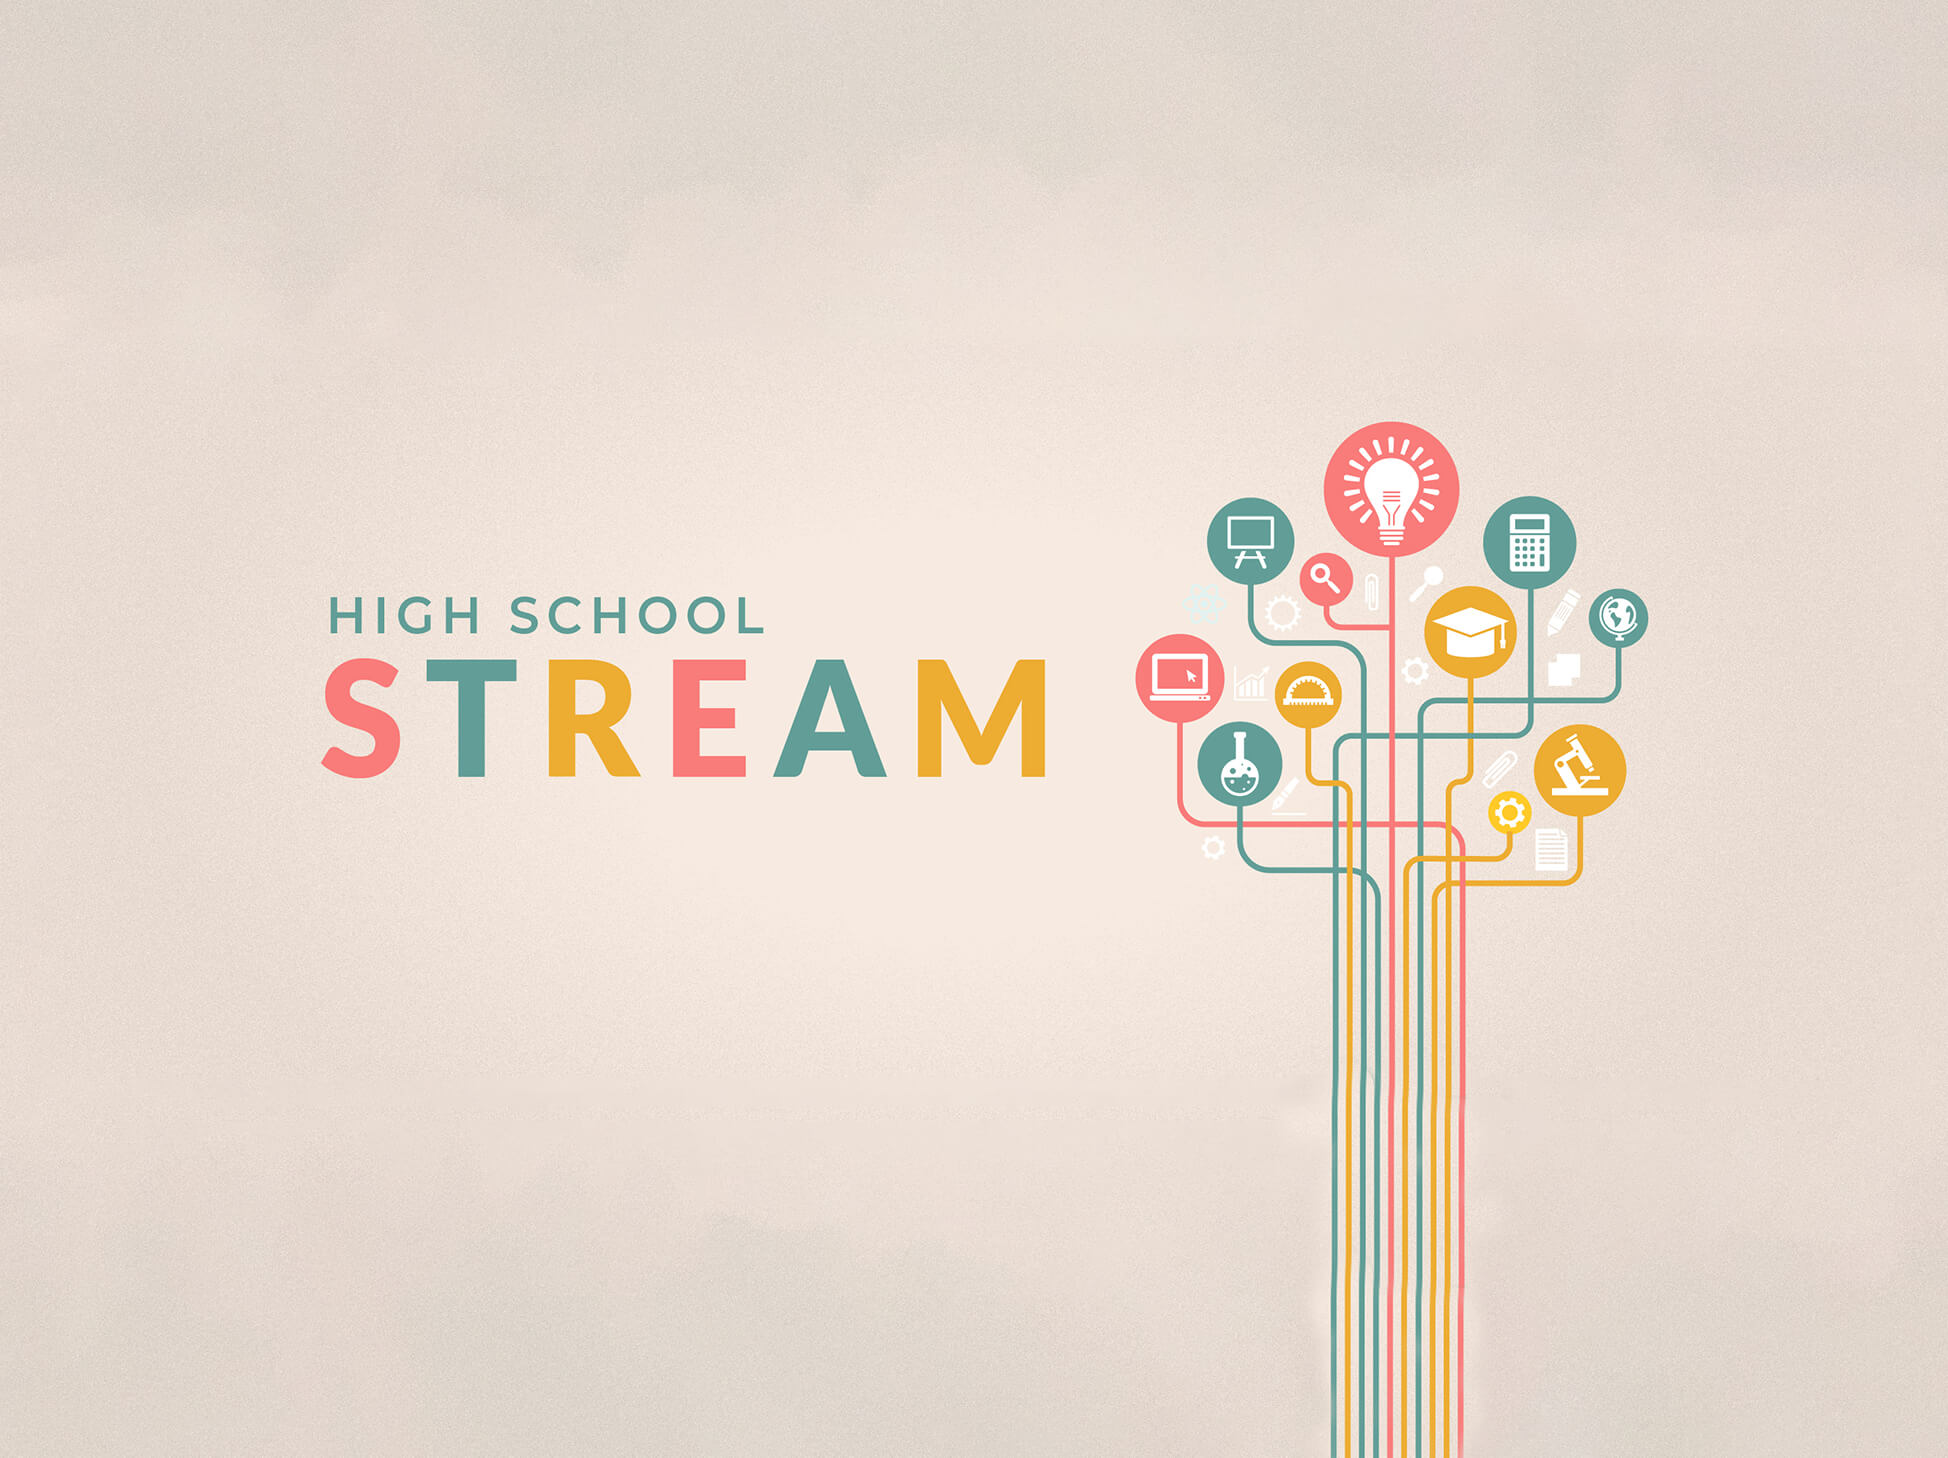 6 Key Factors to Consider When Choosing Your Child’s High School Stream